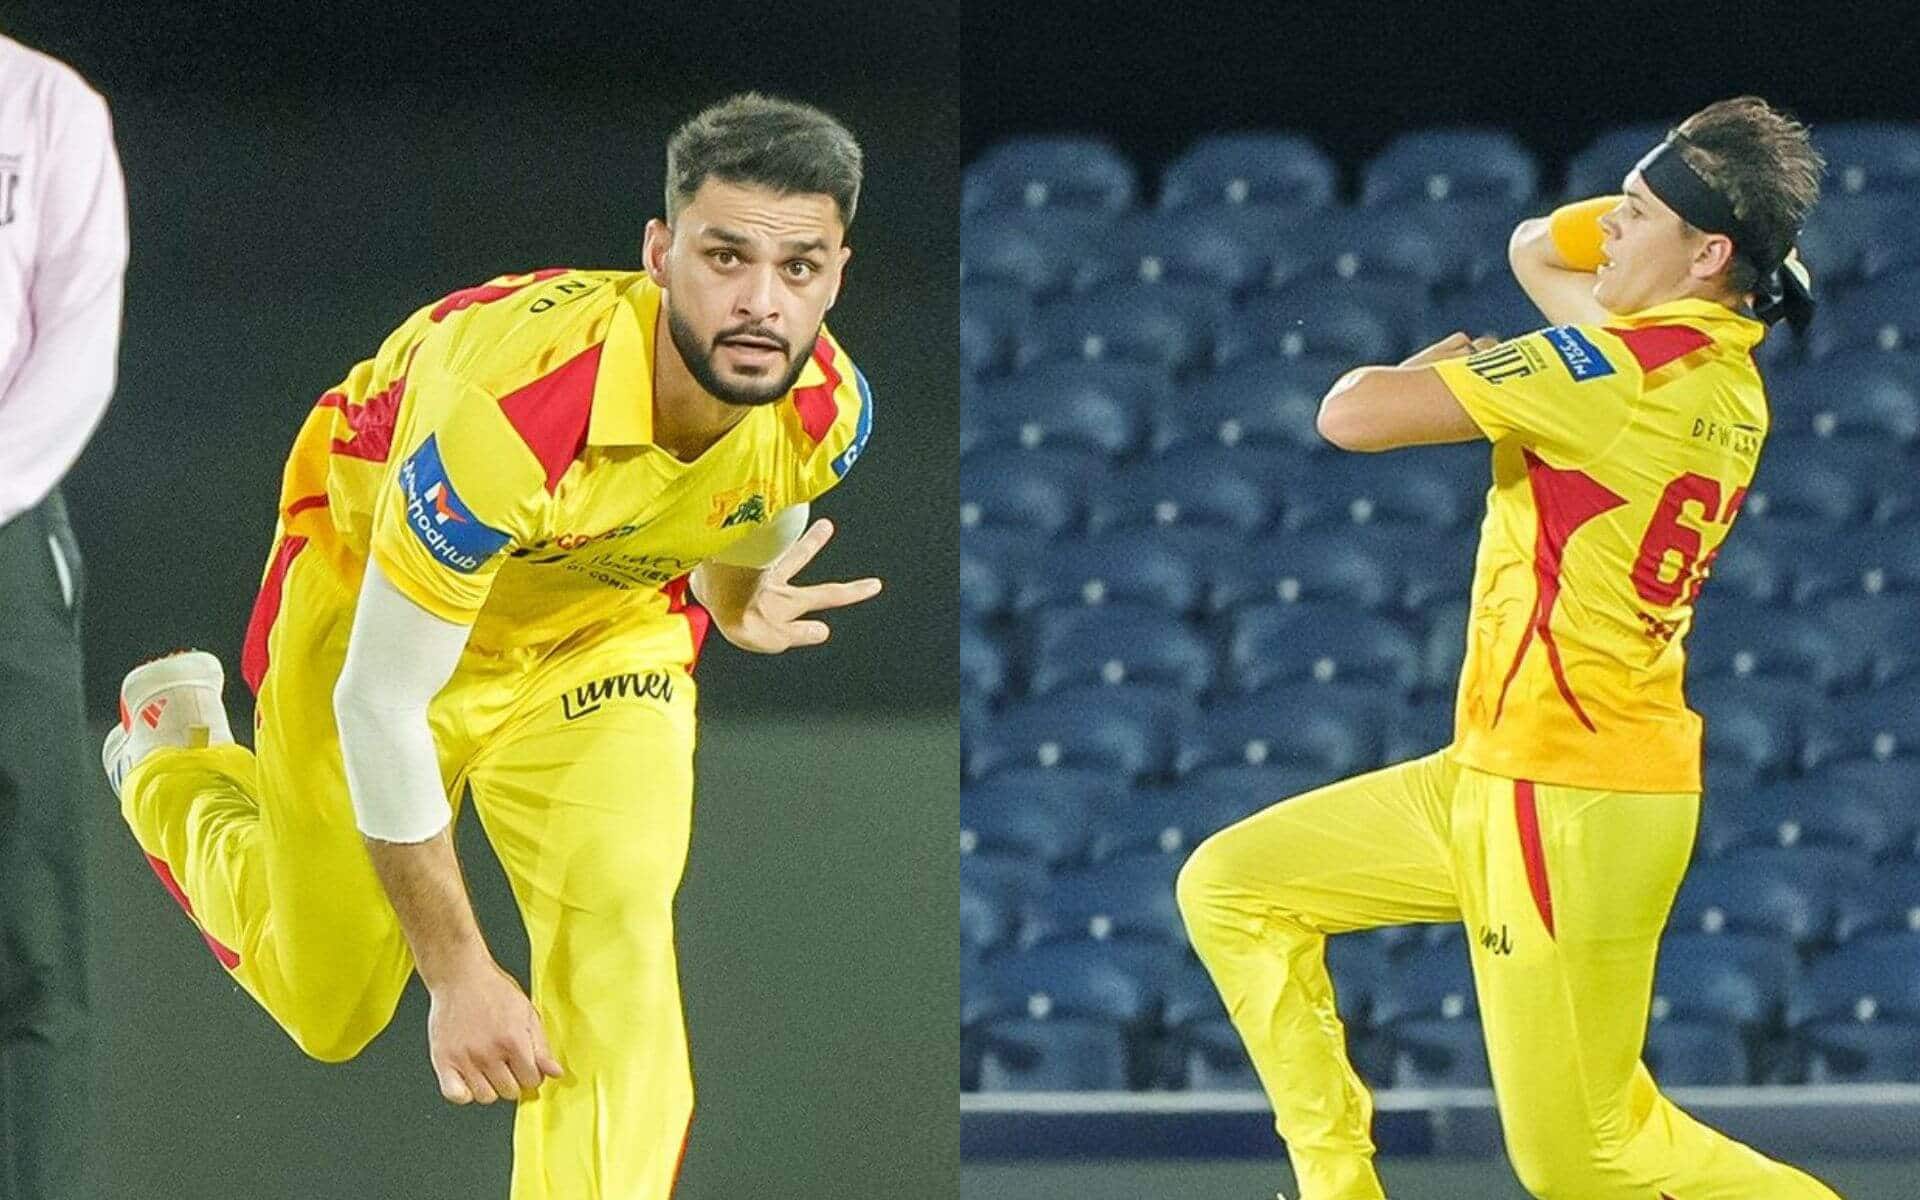 Naveen-ul-Haq and Gerald Coetzee will be crucial for Texas Super Kings in the match [X]